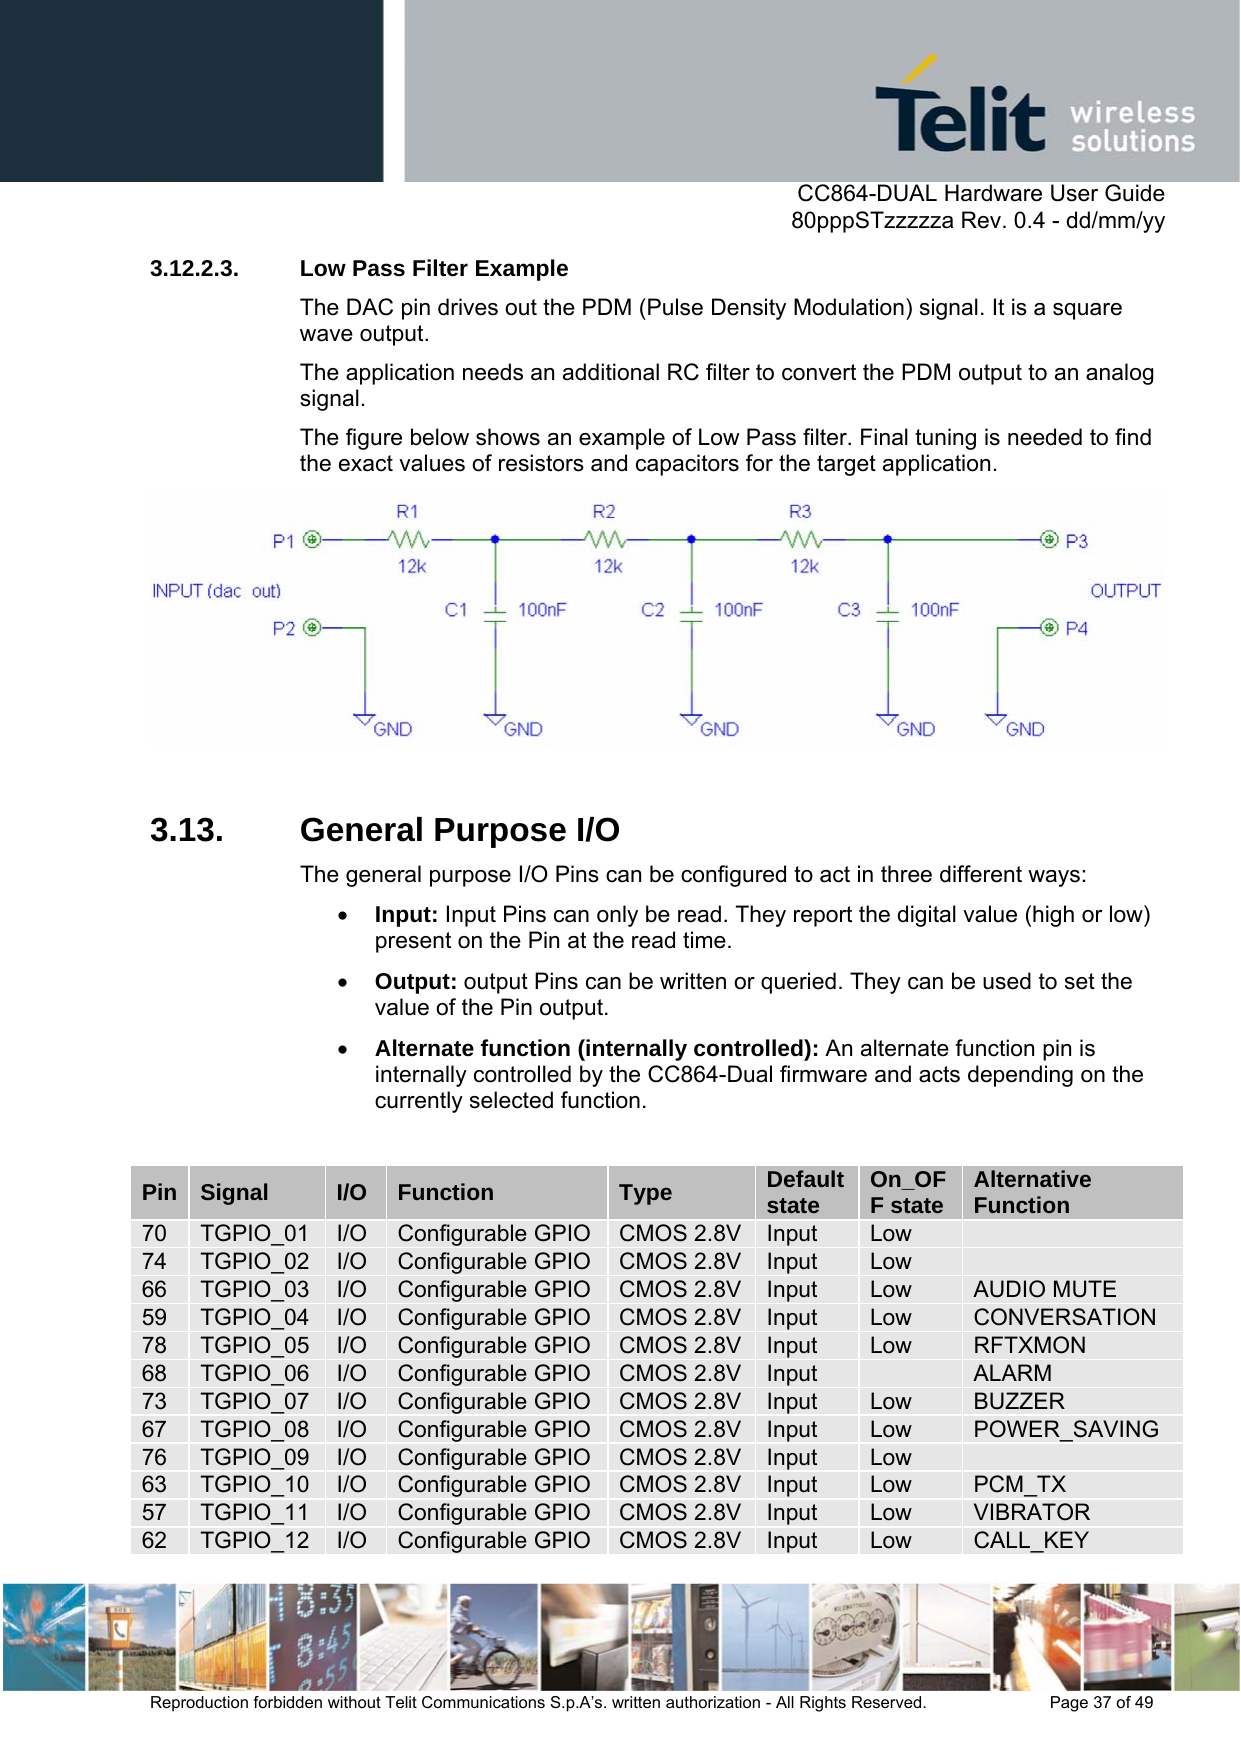      CC864-DUAL Hardware User Guide   80pppSTzzzzza Rev. 0.4 - dd/mm/yy   Reproduction forbidden without Telit Communications S.p.A’s. written authorization - All Rights Reserved.    Page 37 of 49  3.12.2.3.  Low Pass Filter Example The DAC pin drives out the PDM (Pulse Density Modulation) signal. It is a square wave output.  The application needs an additional RC filter to convert the PDM output to an analog signal.  The figure below shows an example of Low Pass filter. Final tuning is needed to find the exact values of resistors and capacitors for the target application.   3.13.  General Purpose I/O The general purpose I/O Pins can be configured to act in three different ways: • Input: Input Pins can only be read. They report the digital value (high or low) present on the Pin at the read time. • Output: output Pins can be written or queried. They can be used to set the value of the Pin output. • Alternate function (internally controlled): An alternate function pin is internally controlled by the CC864-Dual firmware and acts depending on the currently selected function.  Pin  Signal  I/O Function  Type  Default state  On_OFF state  Alternative Function 70  TGPIO_01  I/O Configurable GPIO CMOS 2.8V Input  Low   74  TGPIO_02  I/O Configurable GPIO CMOS 2.8V Input  Low   66  TGPIO_03  I/O Configurable GPIO CMOS 2.8V Input  Low  AUDIO MUTE 59  TGPIO_04  I/O Configurable GPIO CMOS 2.8V Input  Low  CONVERSATION 78  TGPIO_05  I/O Configurable GPIO CMOS 2.8V Input  Low  RFTXMON 68  TGPIO_06  I/O Configurable GPIO CMOS 2.8V Input   ALARM 73  TGPIO_07  I/O Configurable GPIO CMOS 2.8V Input  Low  BUZZER 67  TGPIO_08  I/O Configurable GPIO CMOS 2.8V Input  Low  POWER_SAVING 76  TGPIO_09  I/O Configurable GPIO CMOS 2.8V Input  Low   63  TGPIO_10  I/O Configurable GPIO CMOS 2.8V Input  Low  PCM_TX 57  TGPIO_11  I/O Configurable GPIO CMOS 2.8V Input  Low  VIBRATOR 62  TGPIO_12  I/O Configurable GPIO CMOS 2.8V Input  Low  CALL_KEY 